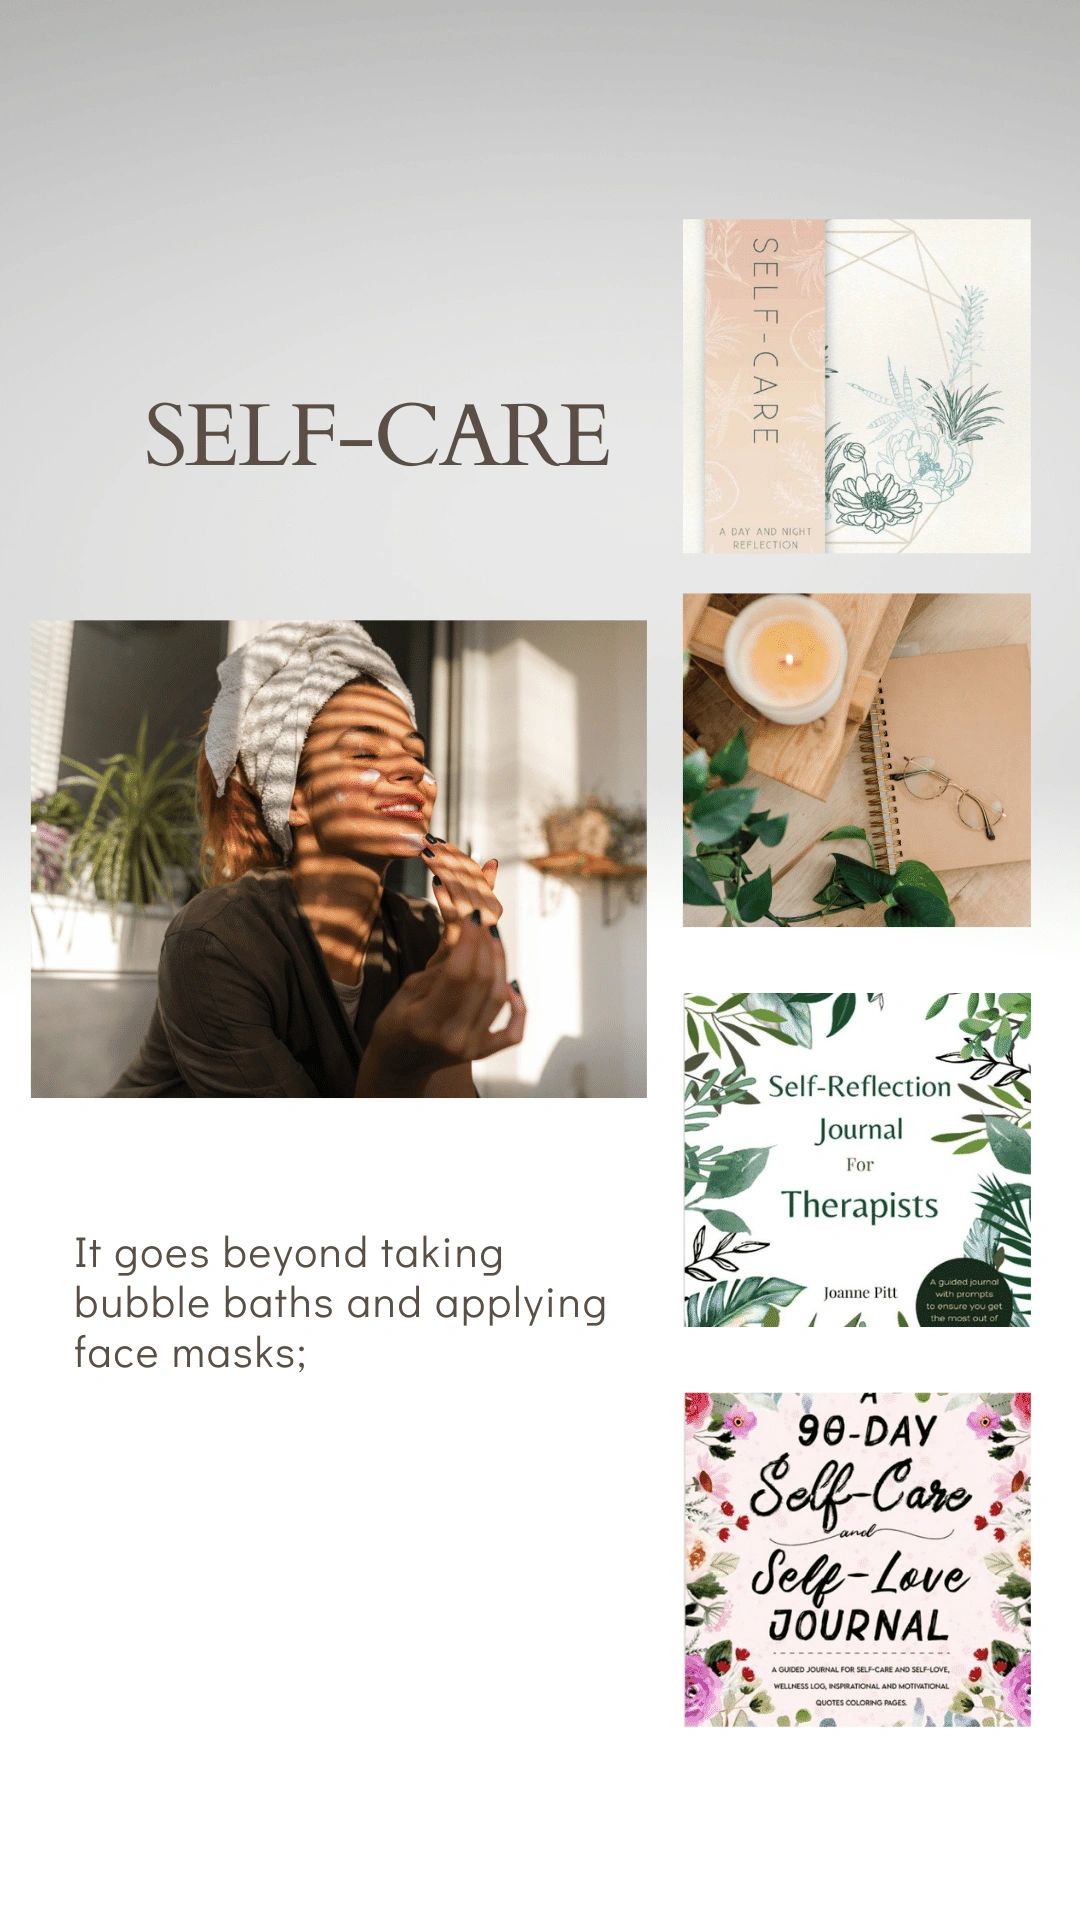 THE IMPORTANCE OF SELF-CARE, AND THE REASONS WE SHOULDN'T IGNORE